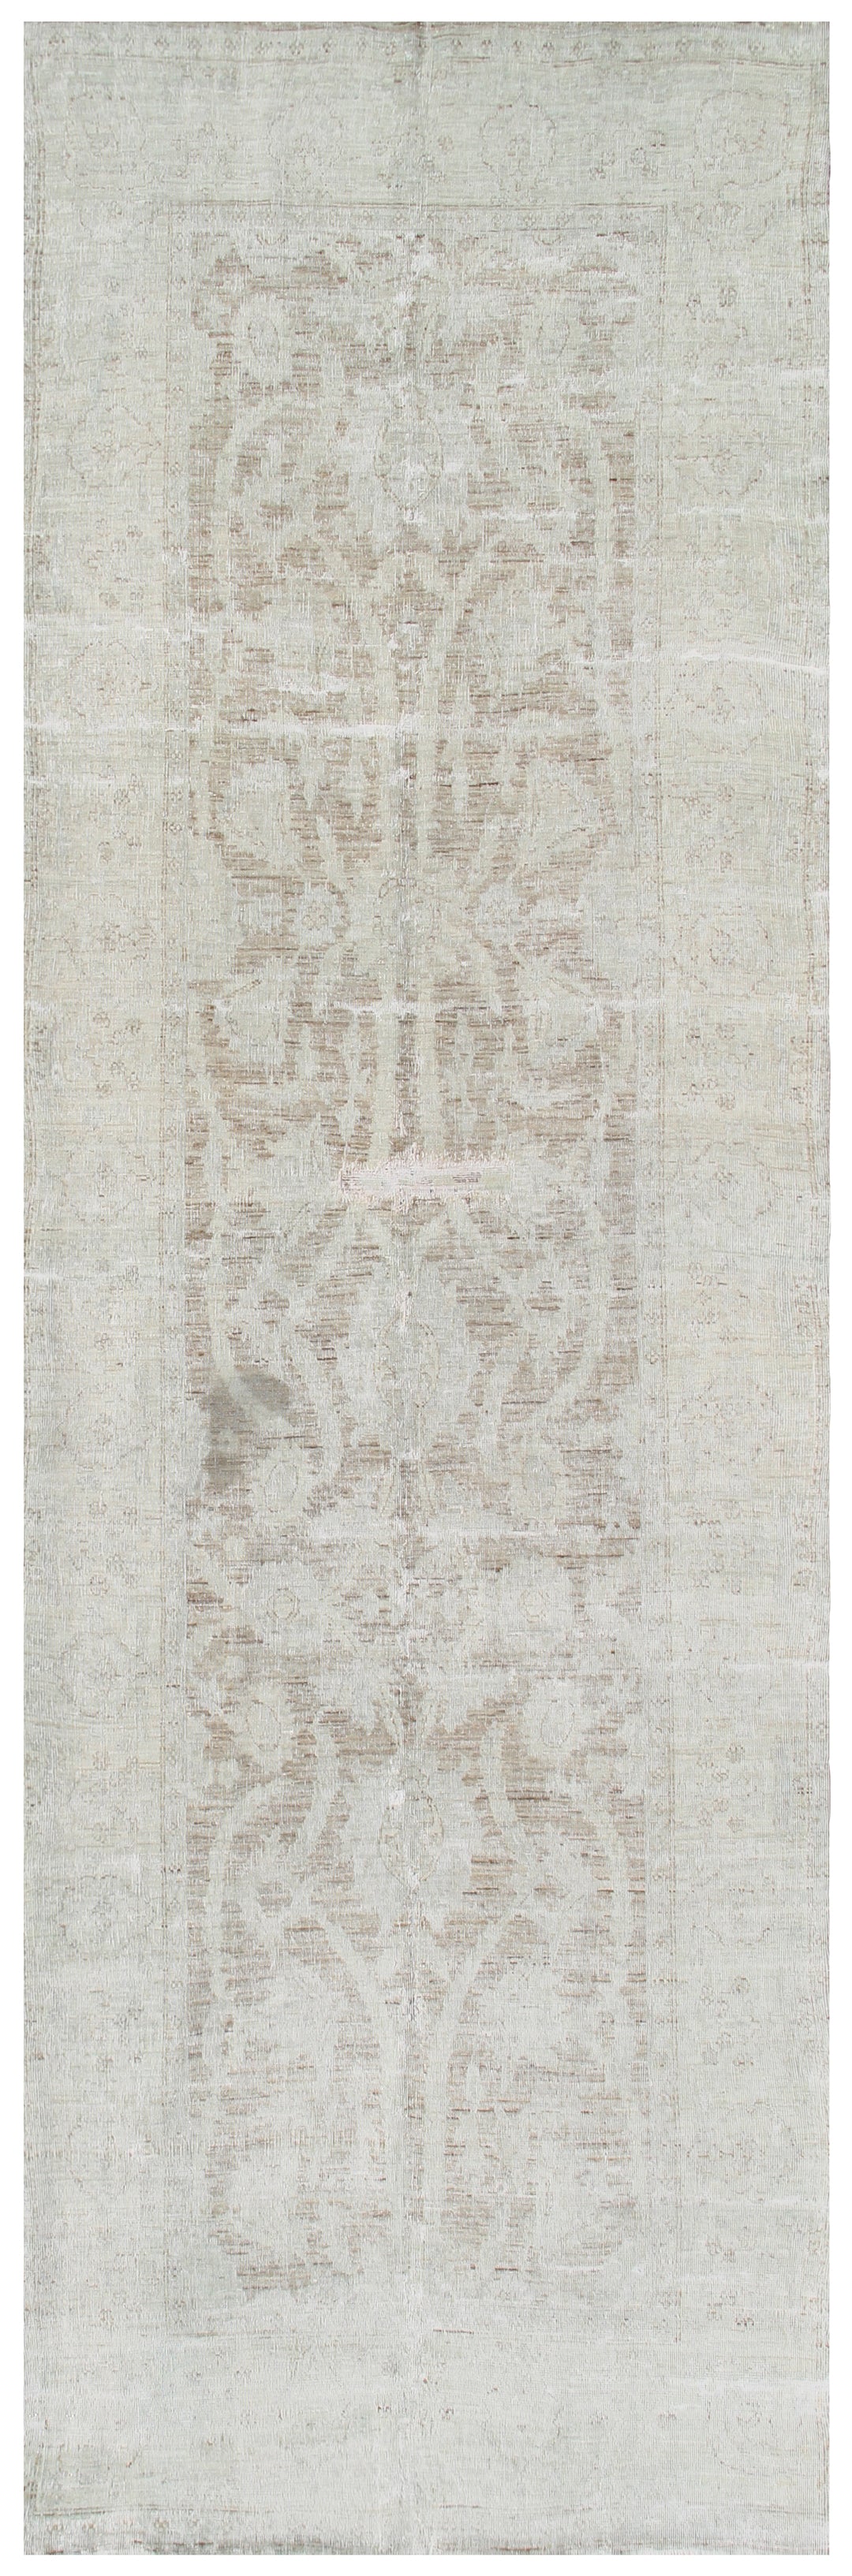 4x10 Pale Indian Design Contemporary Ariana Vintage Collection Runner Rug